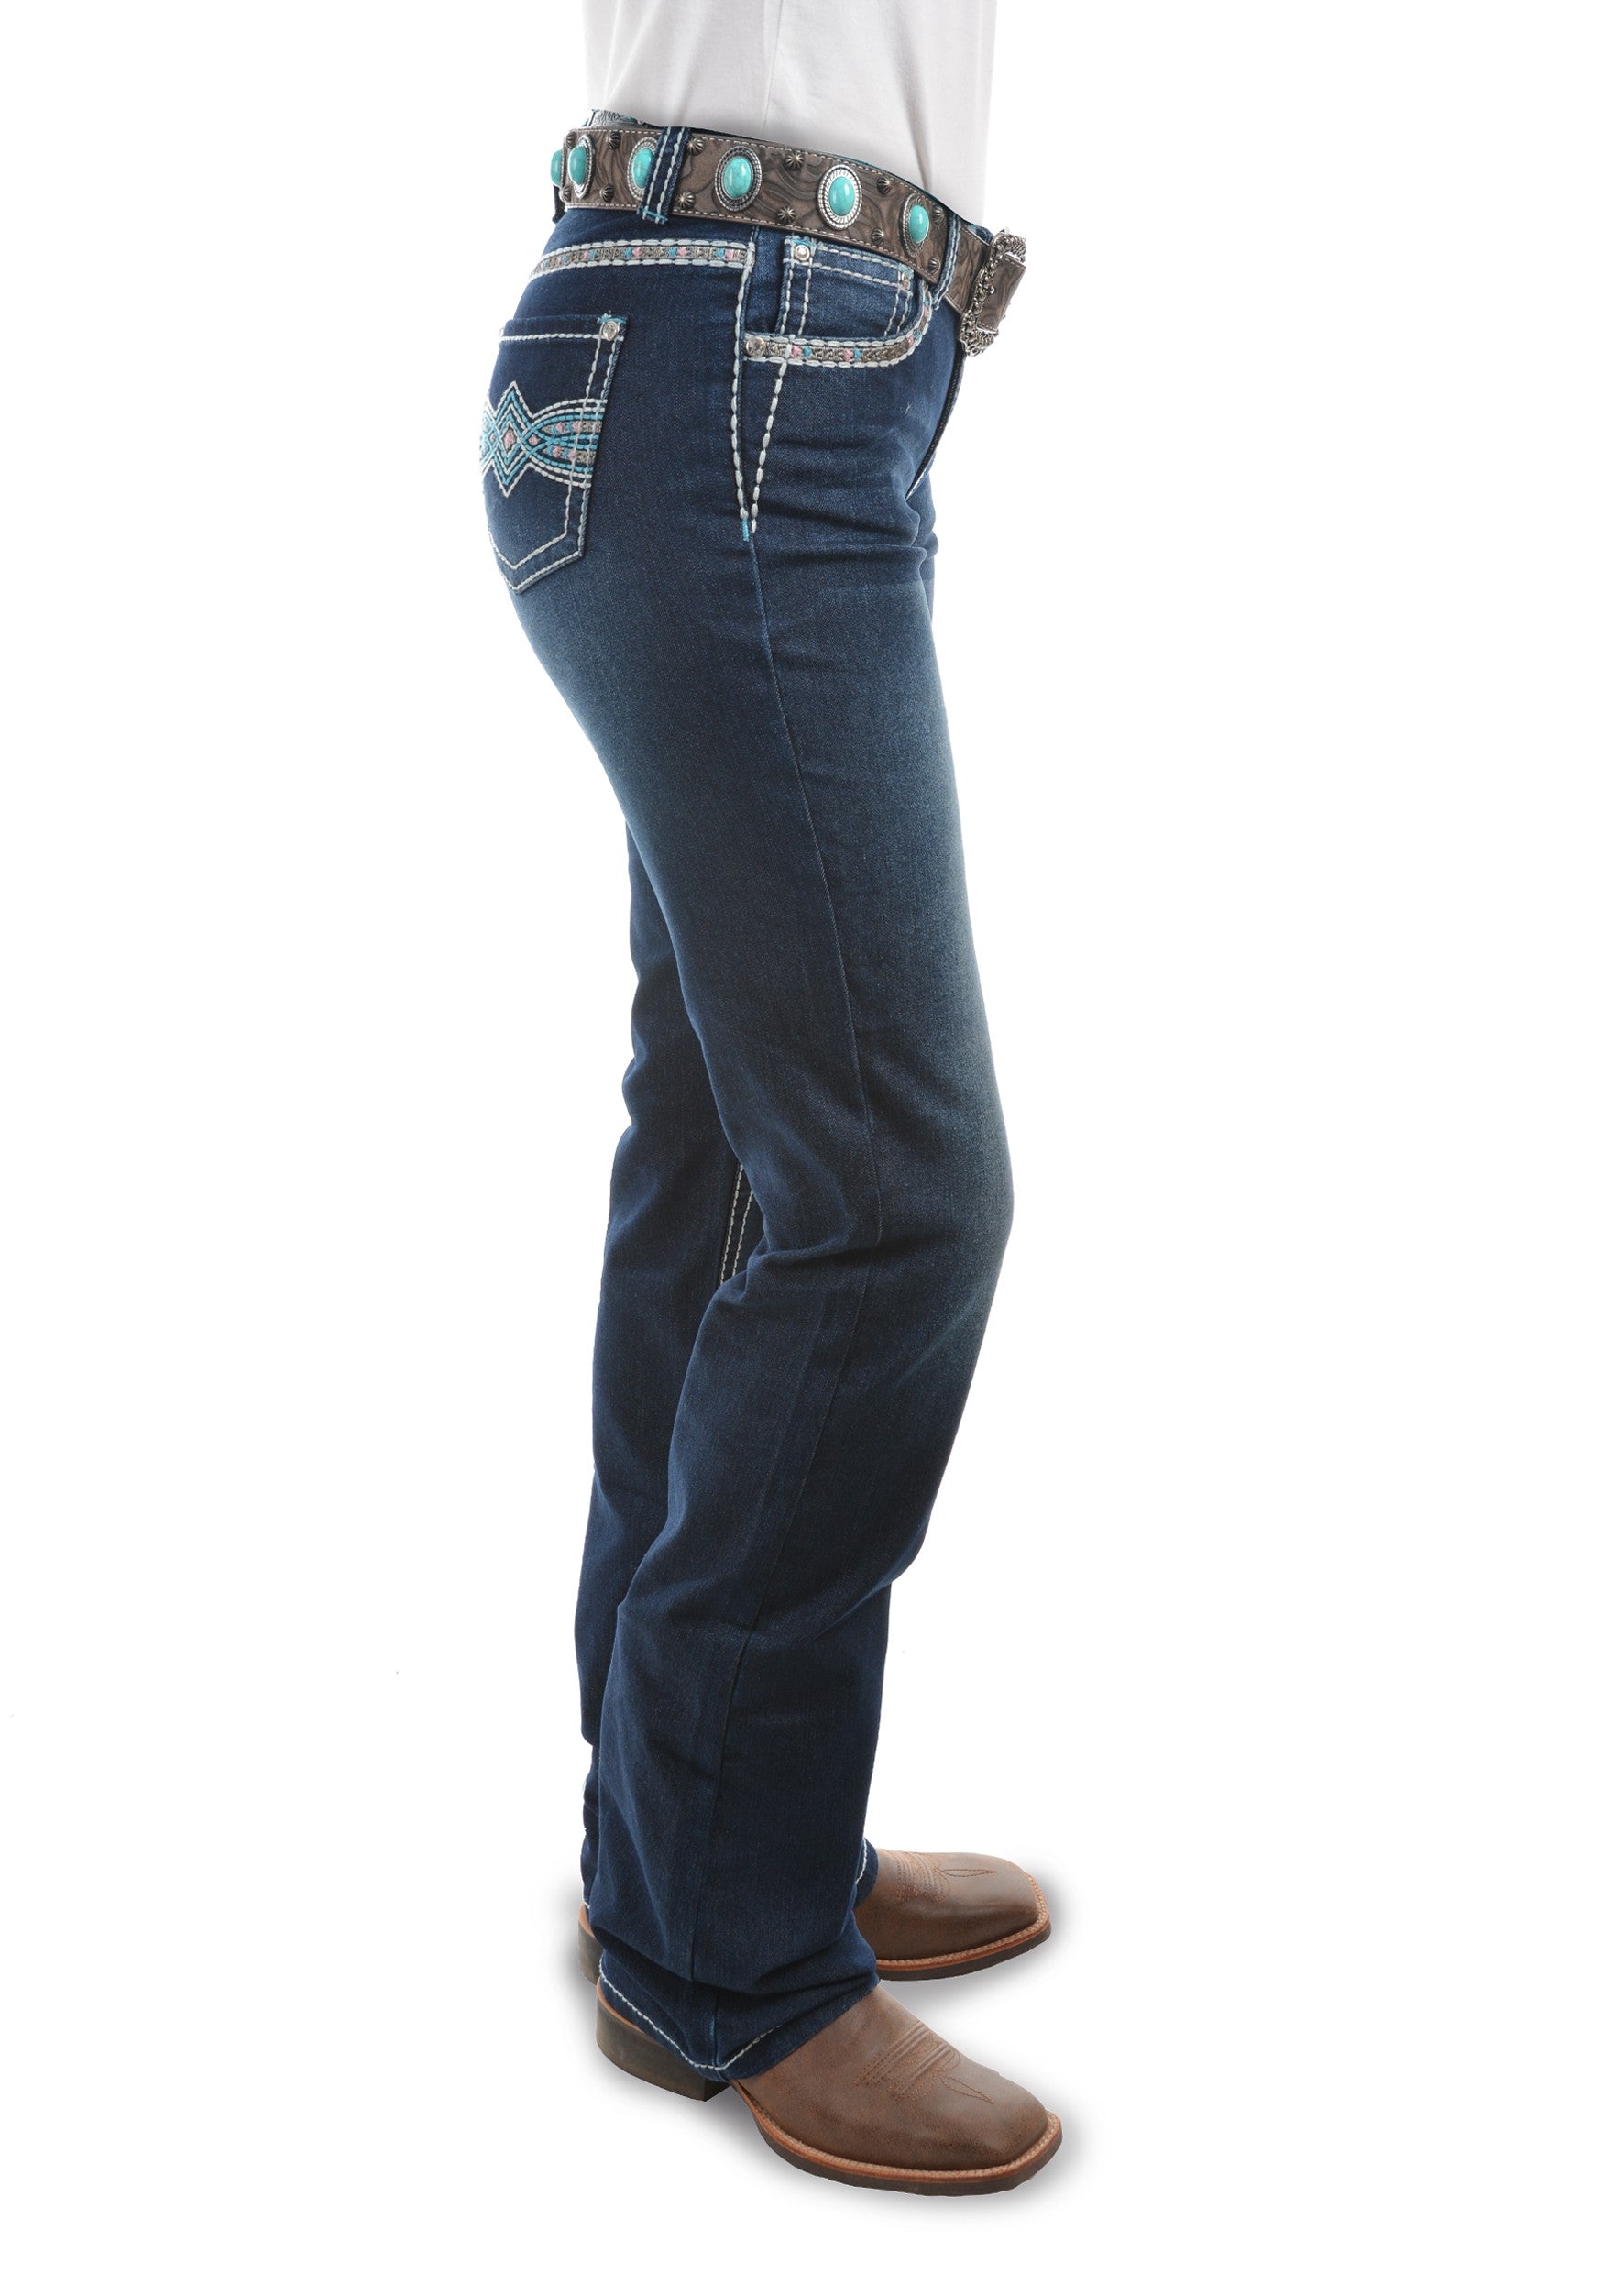 Pure Western | Womens | Jeans | 36" | Boot Cut | Waist Mid | Relaxed Rider | Indiana